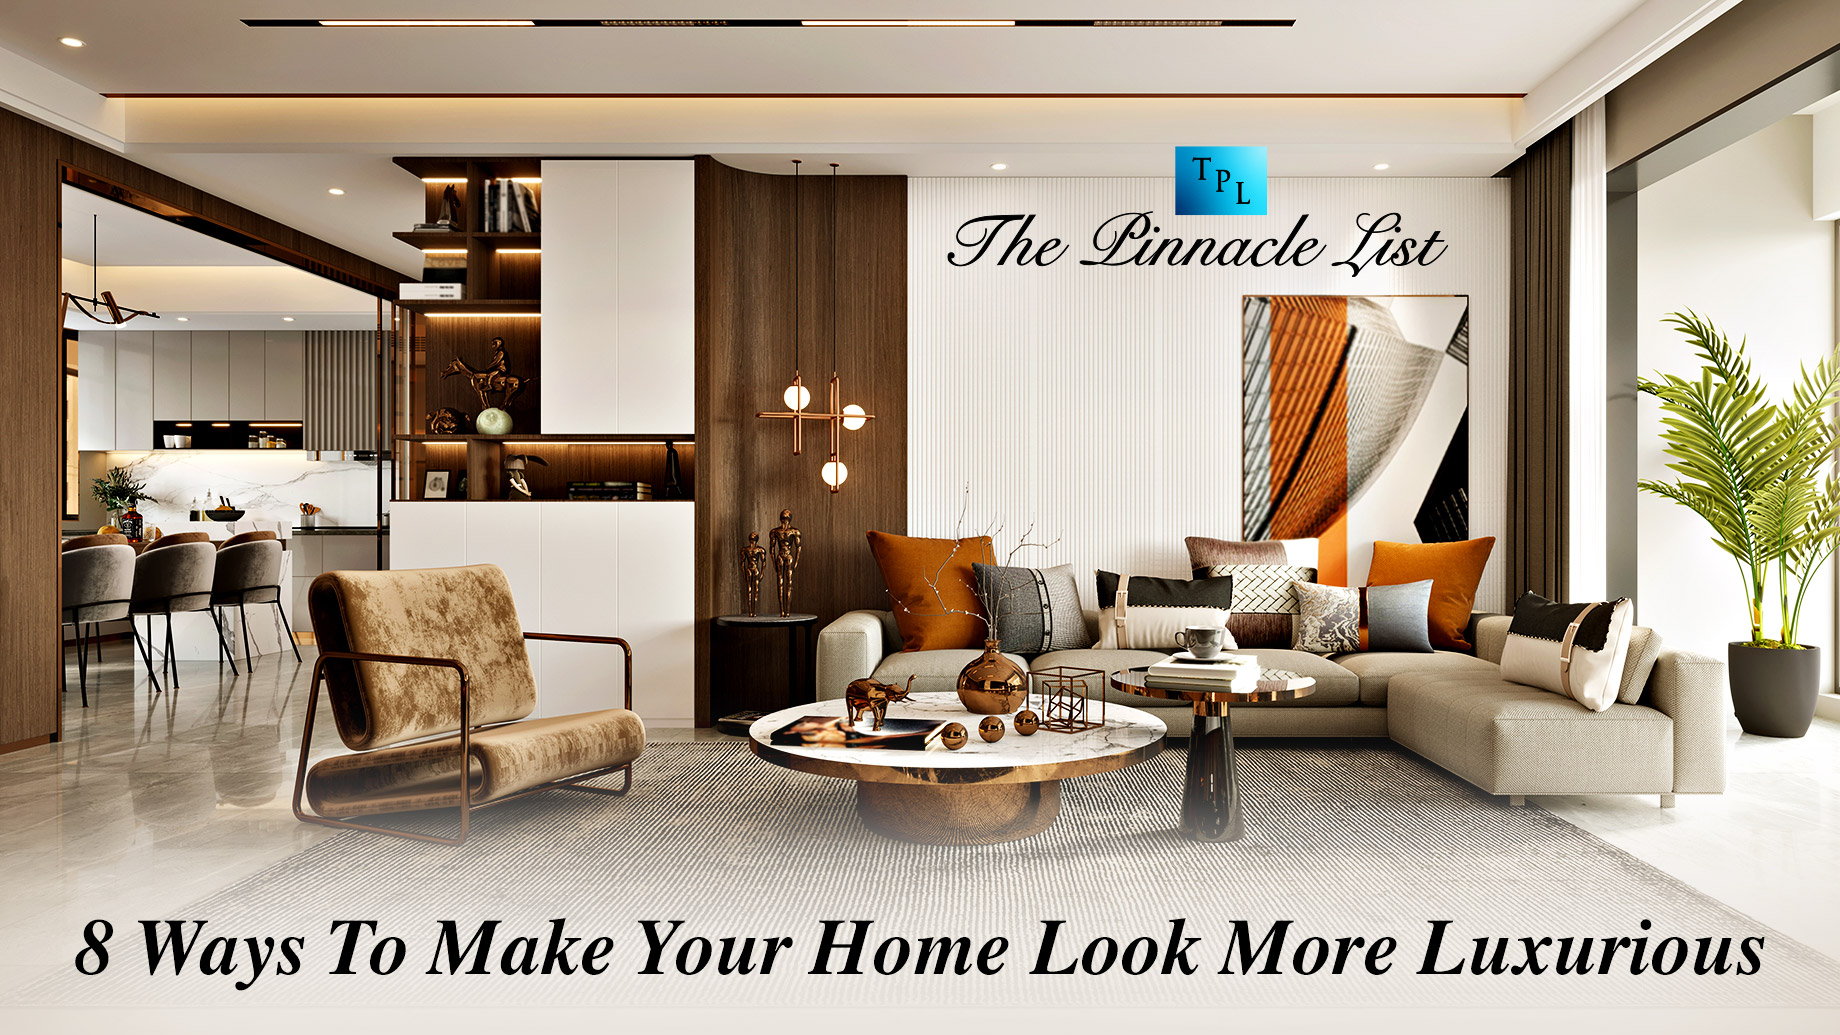 8 Ways To Make Your Home Look More Luxurious